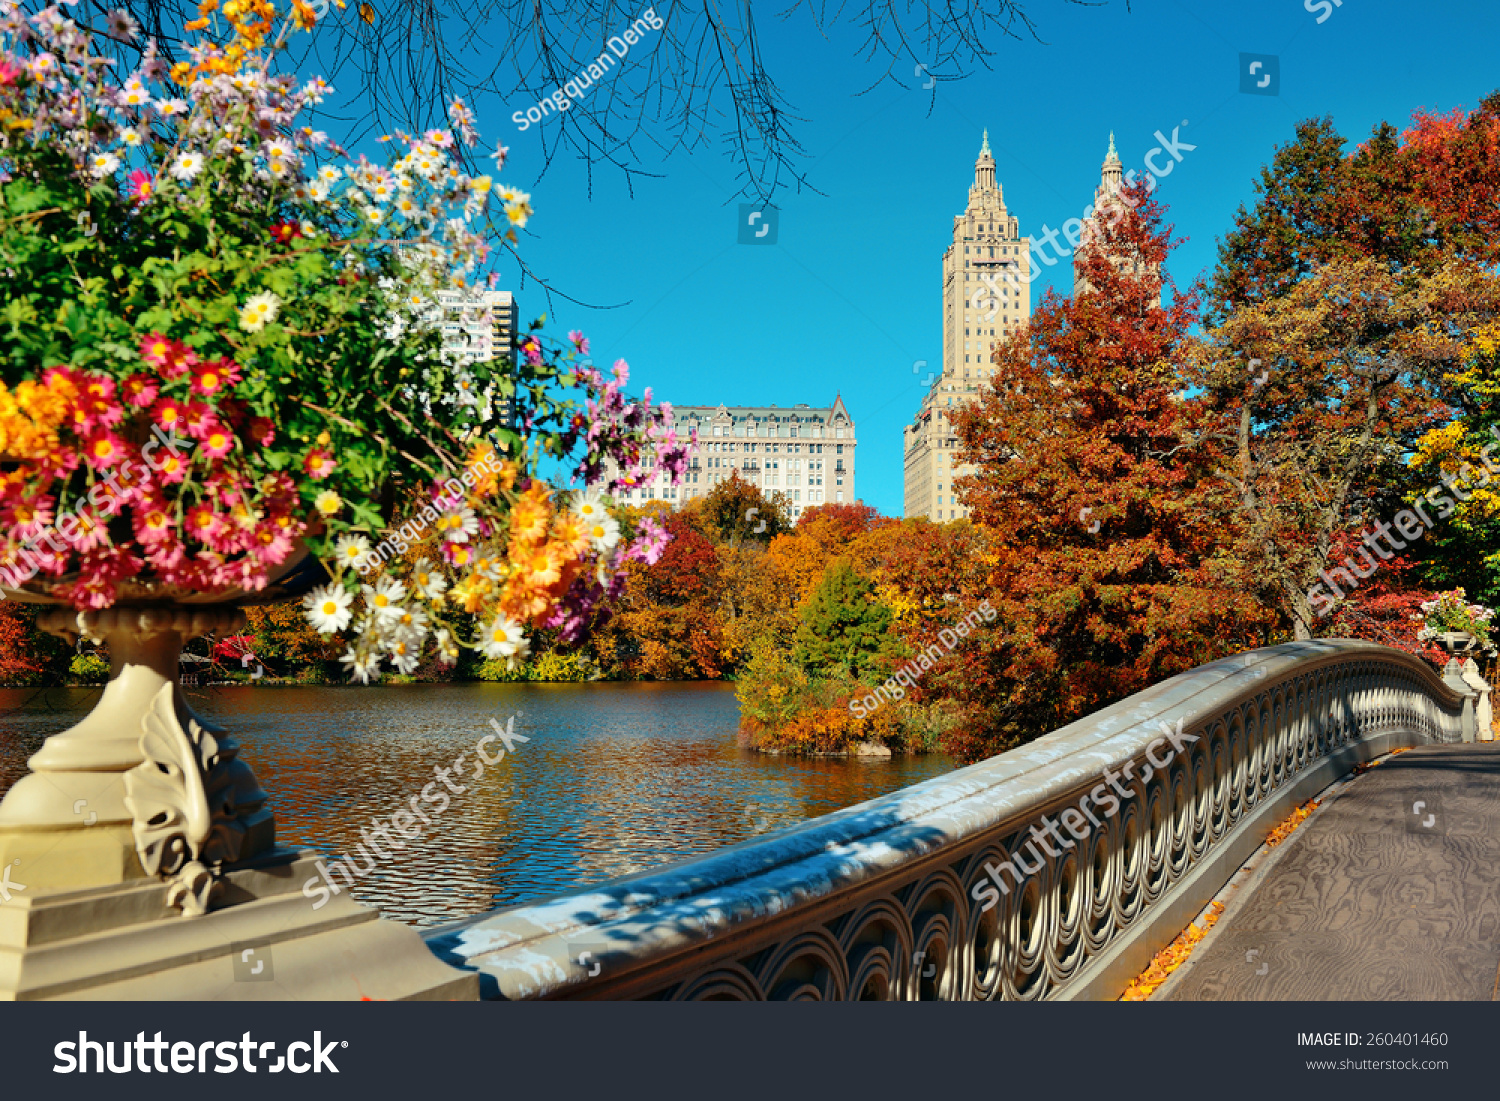 Central Park Autumn And Buildings In Midtown Manhattan New York City ...